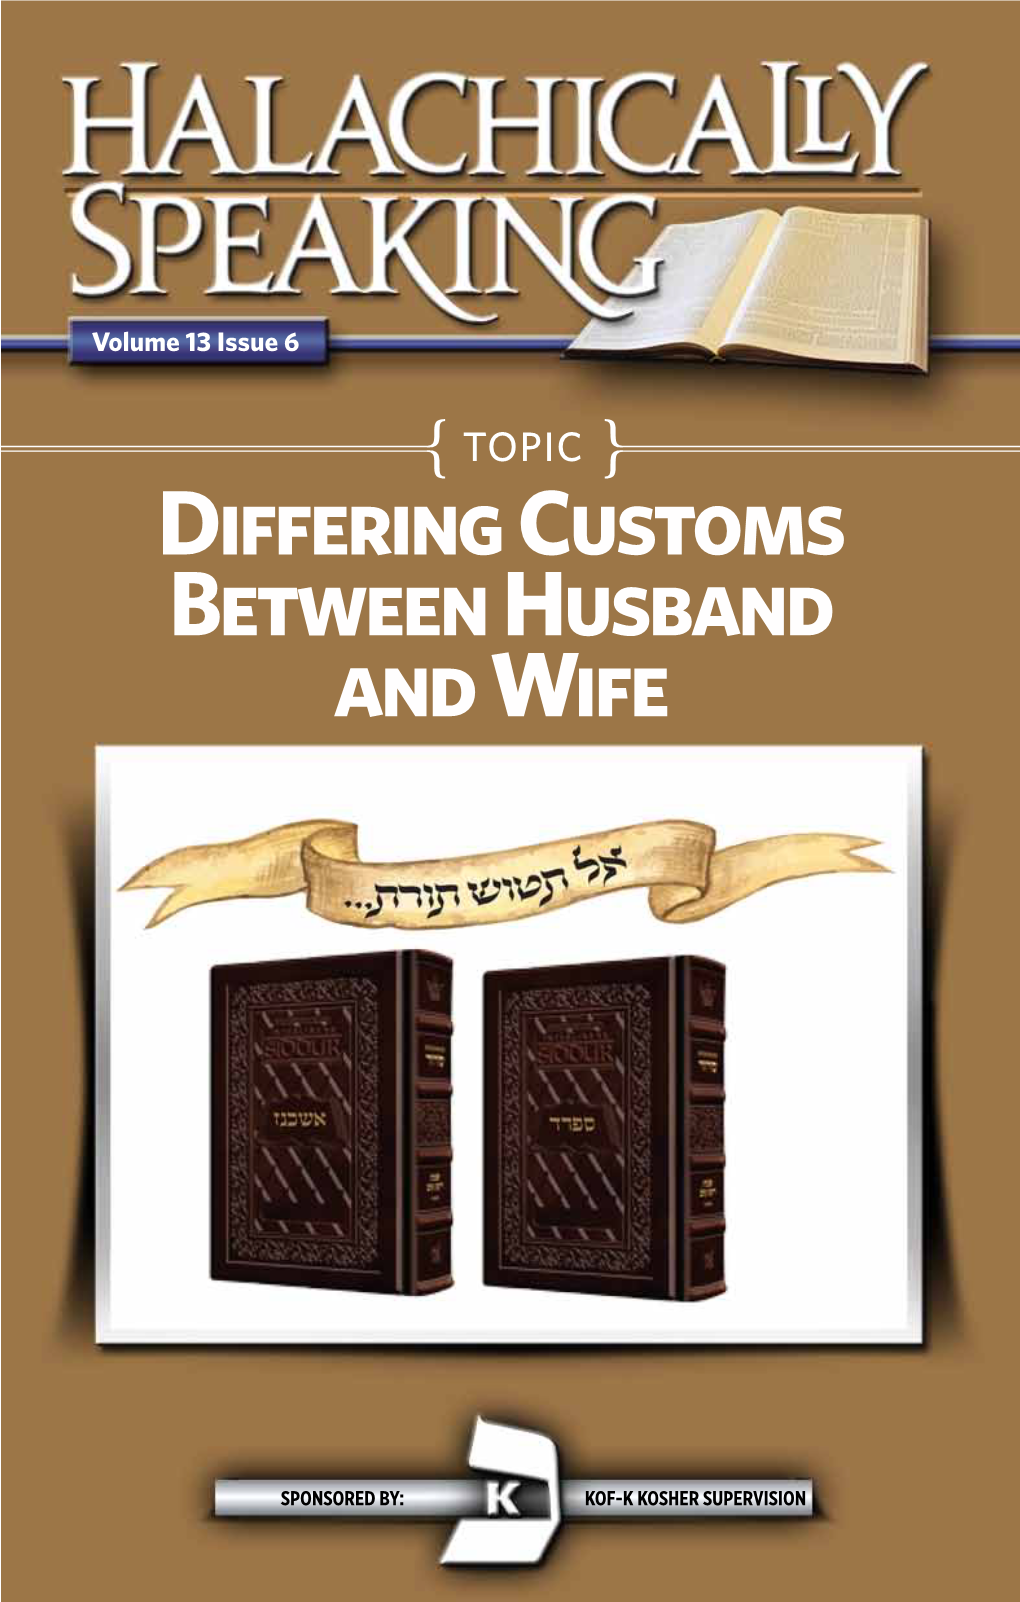 Differing Customs Between Husband and Wife